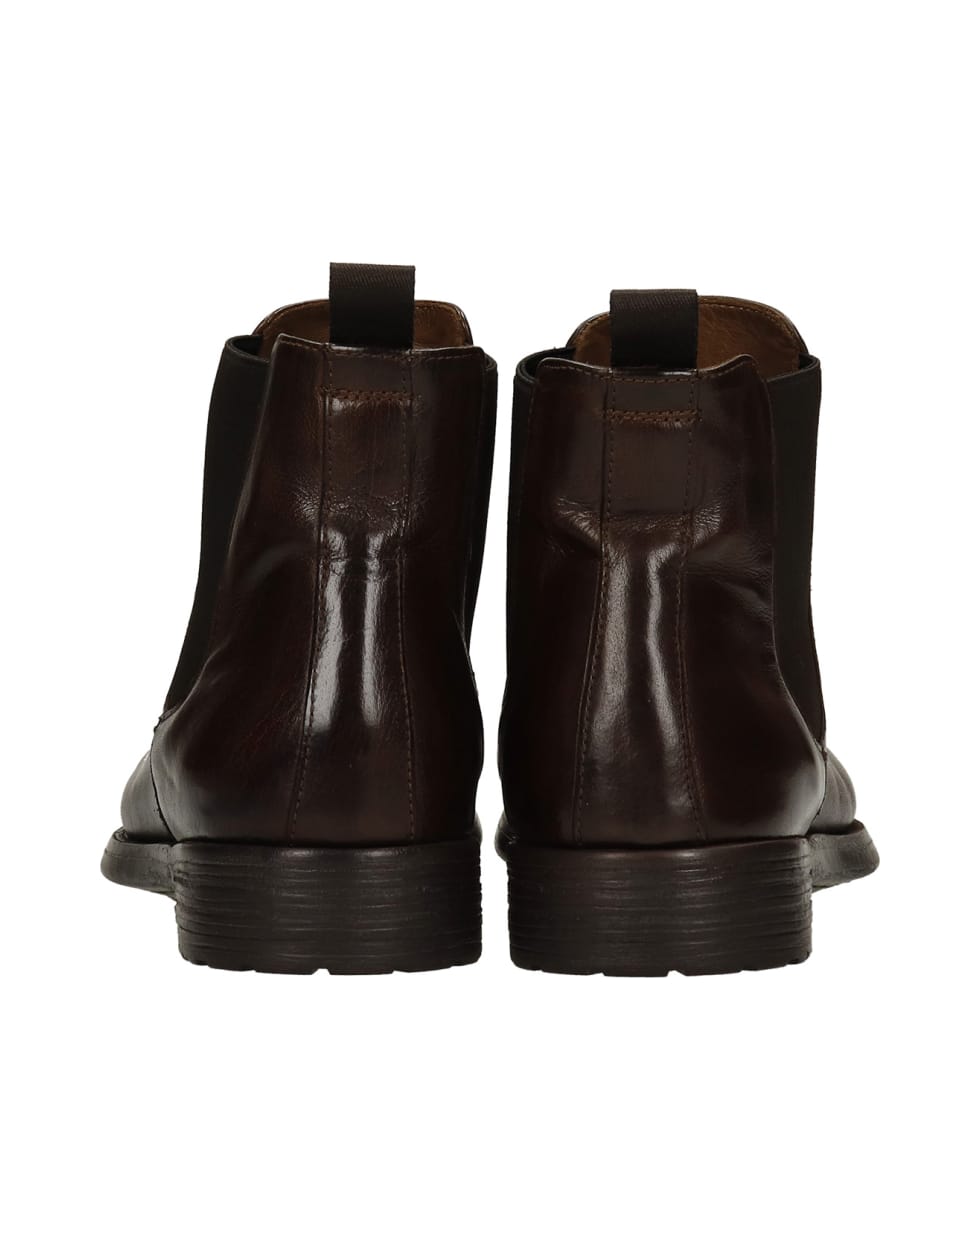 Officine Creative Hive 007 Ankle Boots In Brown Leather - brown